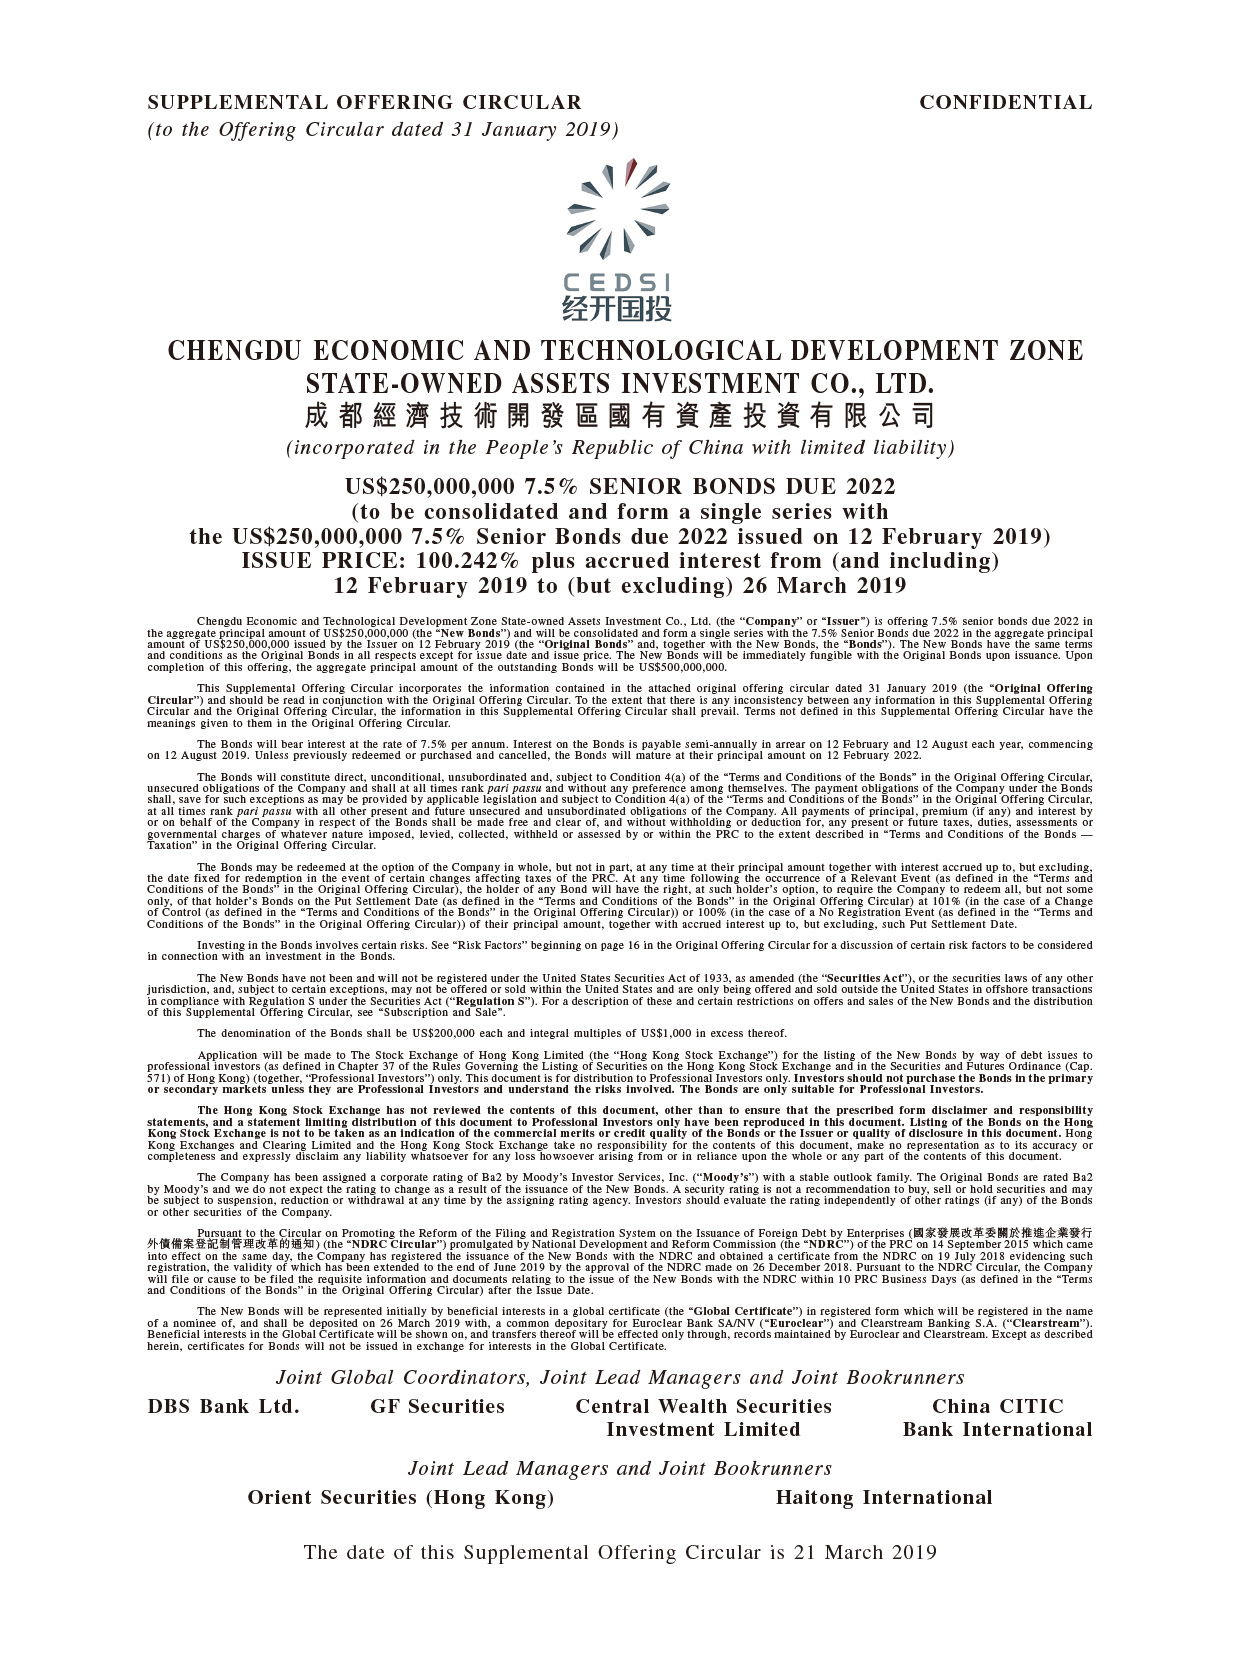 CHENGDU ECONOMIC AND TECHNOLOGICAL DEVELOPMENT ZONE STATE-OWNED ASSETS INVESTMENT CO., LTD.